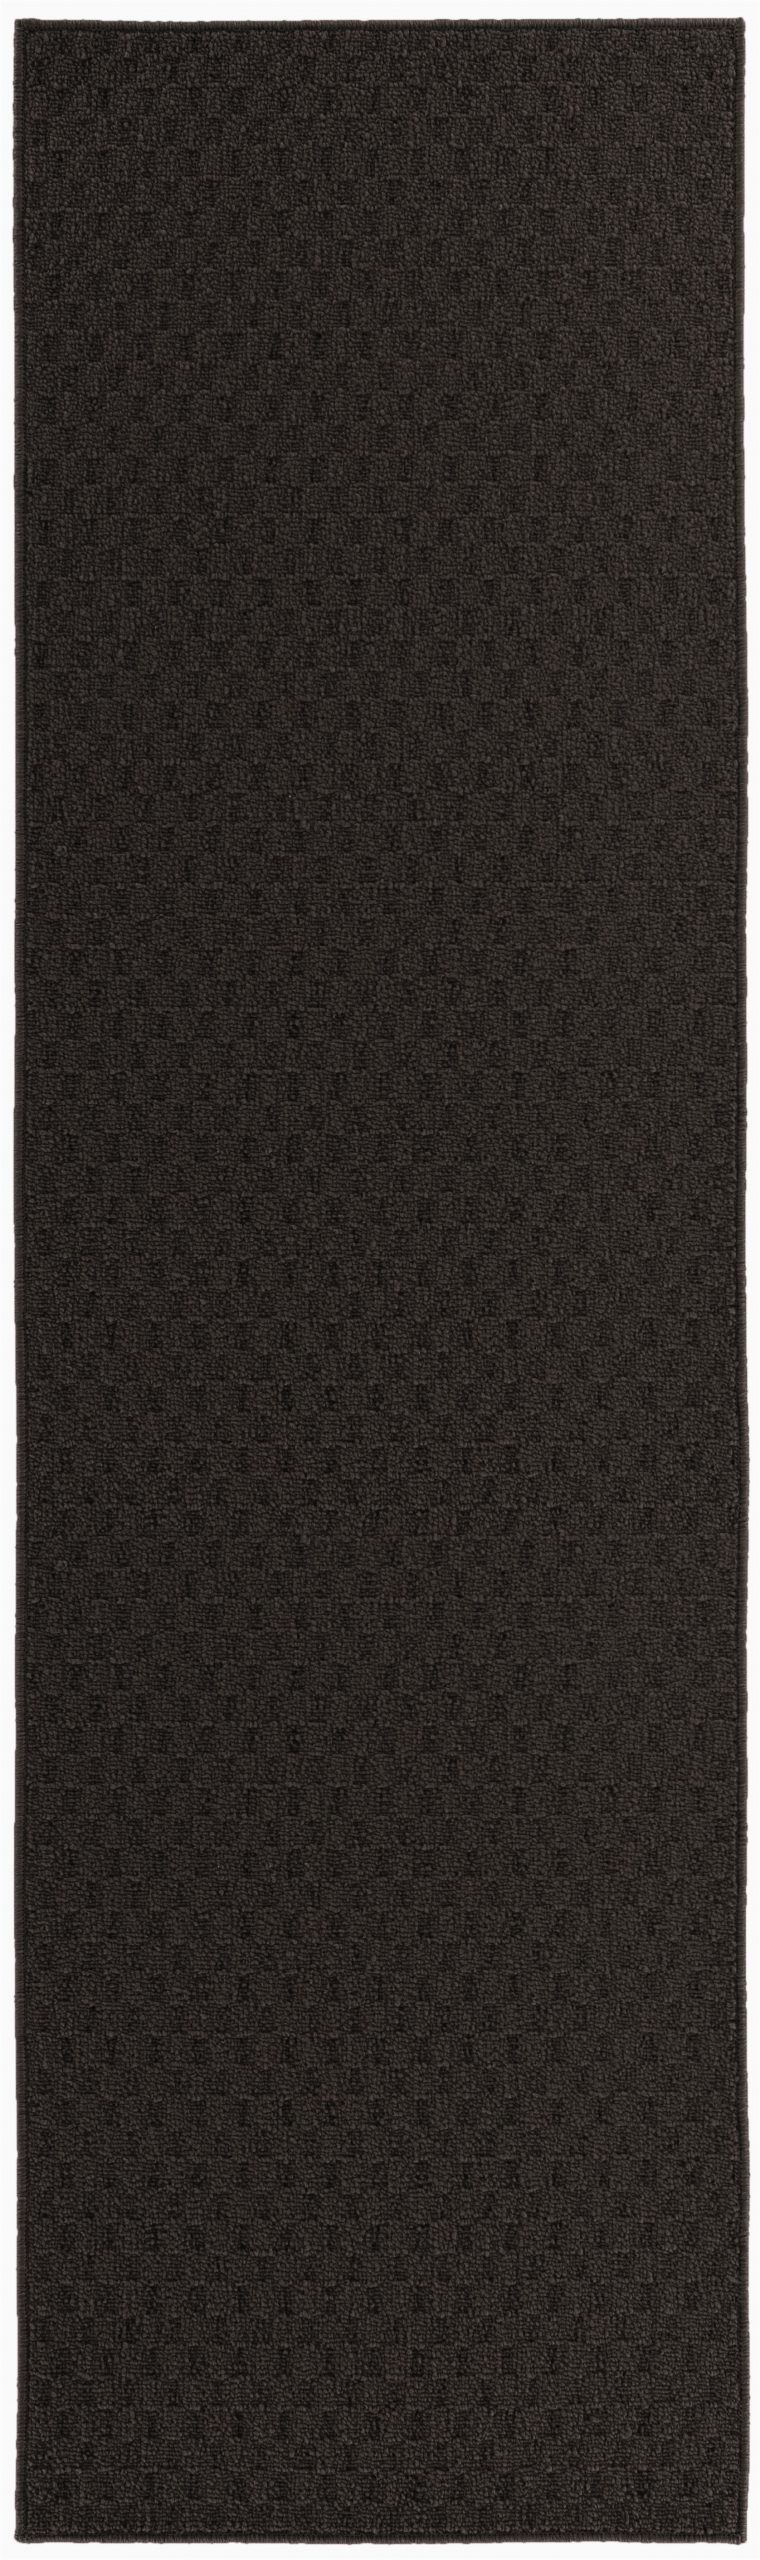 Garland Rug town Square area Rug Garland Rug town Square Black 2 X12 solid Indoor Runner Rug